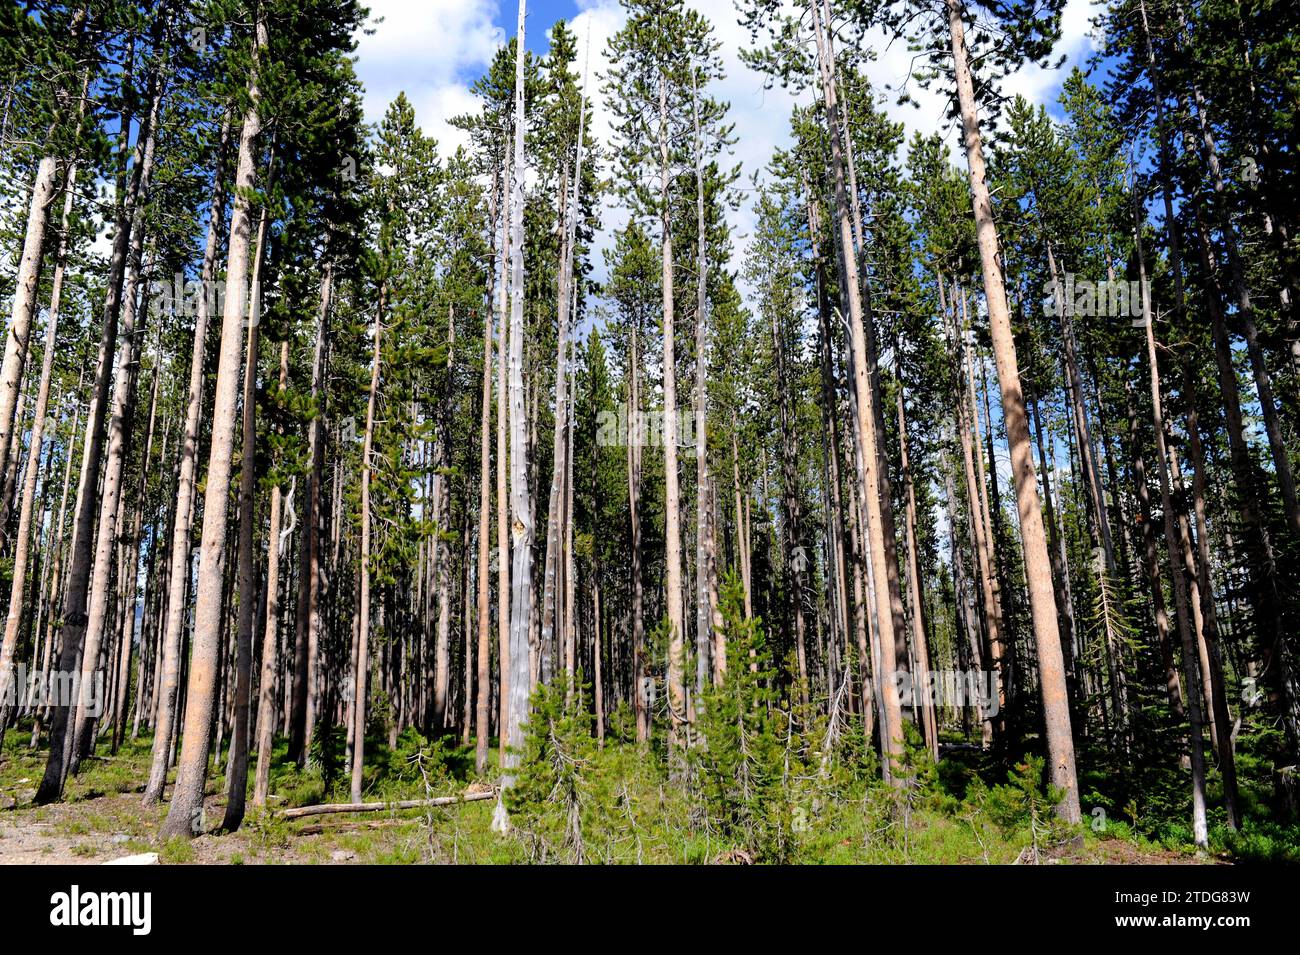 Lodgepole pine (Pinus contorta) is a coniferous tree native to western USA. This photo was taken in Yellowstone National Park, Wyoming, USA. Stock Photo